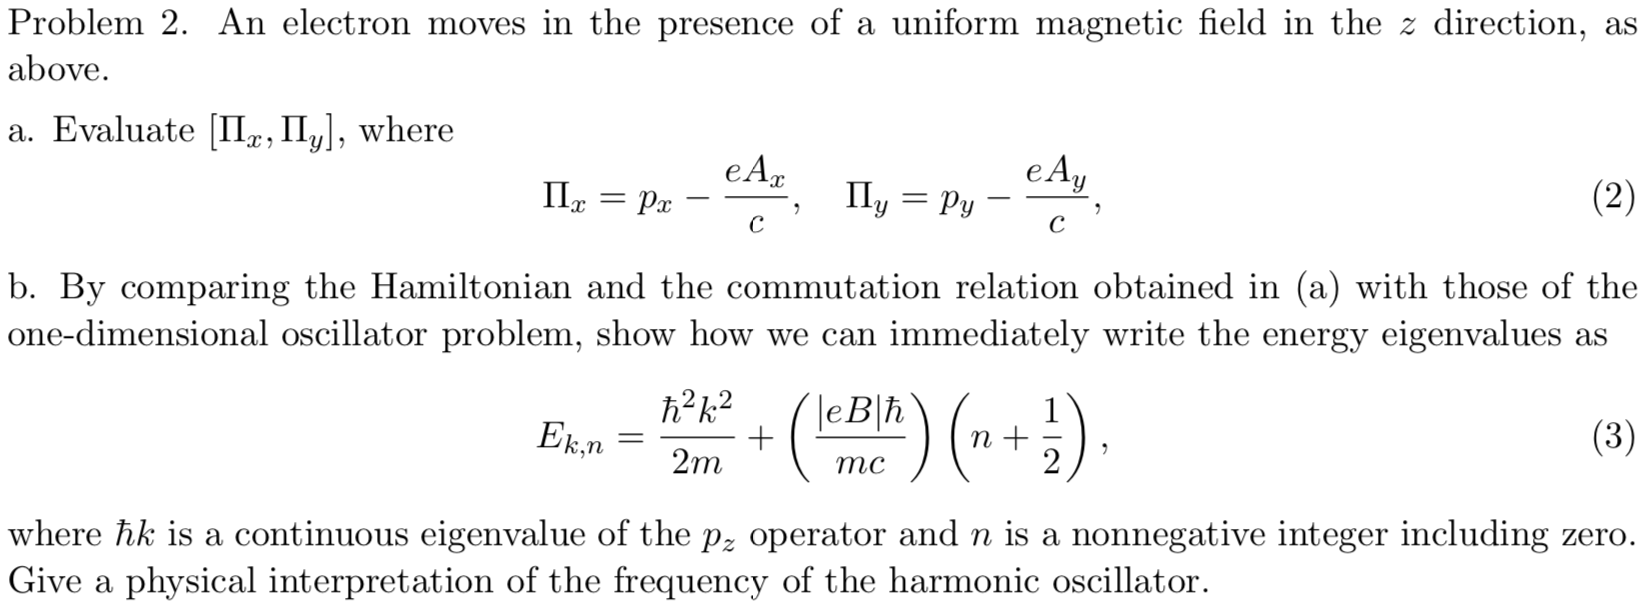 Problem 2. An electron moves in the presence of a uniform magnetic field in the z direction, as
above.
a. Evaluate II, II, where
e А,
eAy
Py
Ily
(2)
Ра
с
с
b. By comparing the Hamiltonian and the commutation relation obtained in (a) with those of the
one-dimensional oscillator problem, show how we can immediately write the energy eigenvalues as
h2k2
leBh
1
Ek.n
(3)
2m
тс
where hk is a continuous eigenvalue of the p2 operator and n is a nonnegative integer including zero.
Give a physical interpretation of the frequency of the harmonic oscillator
